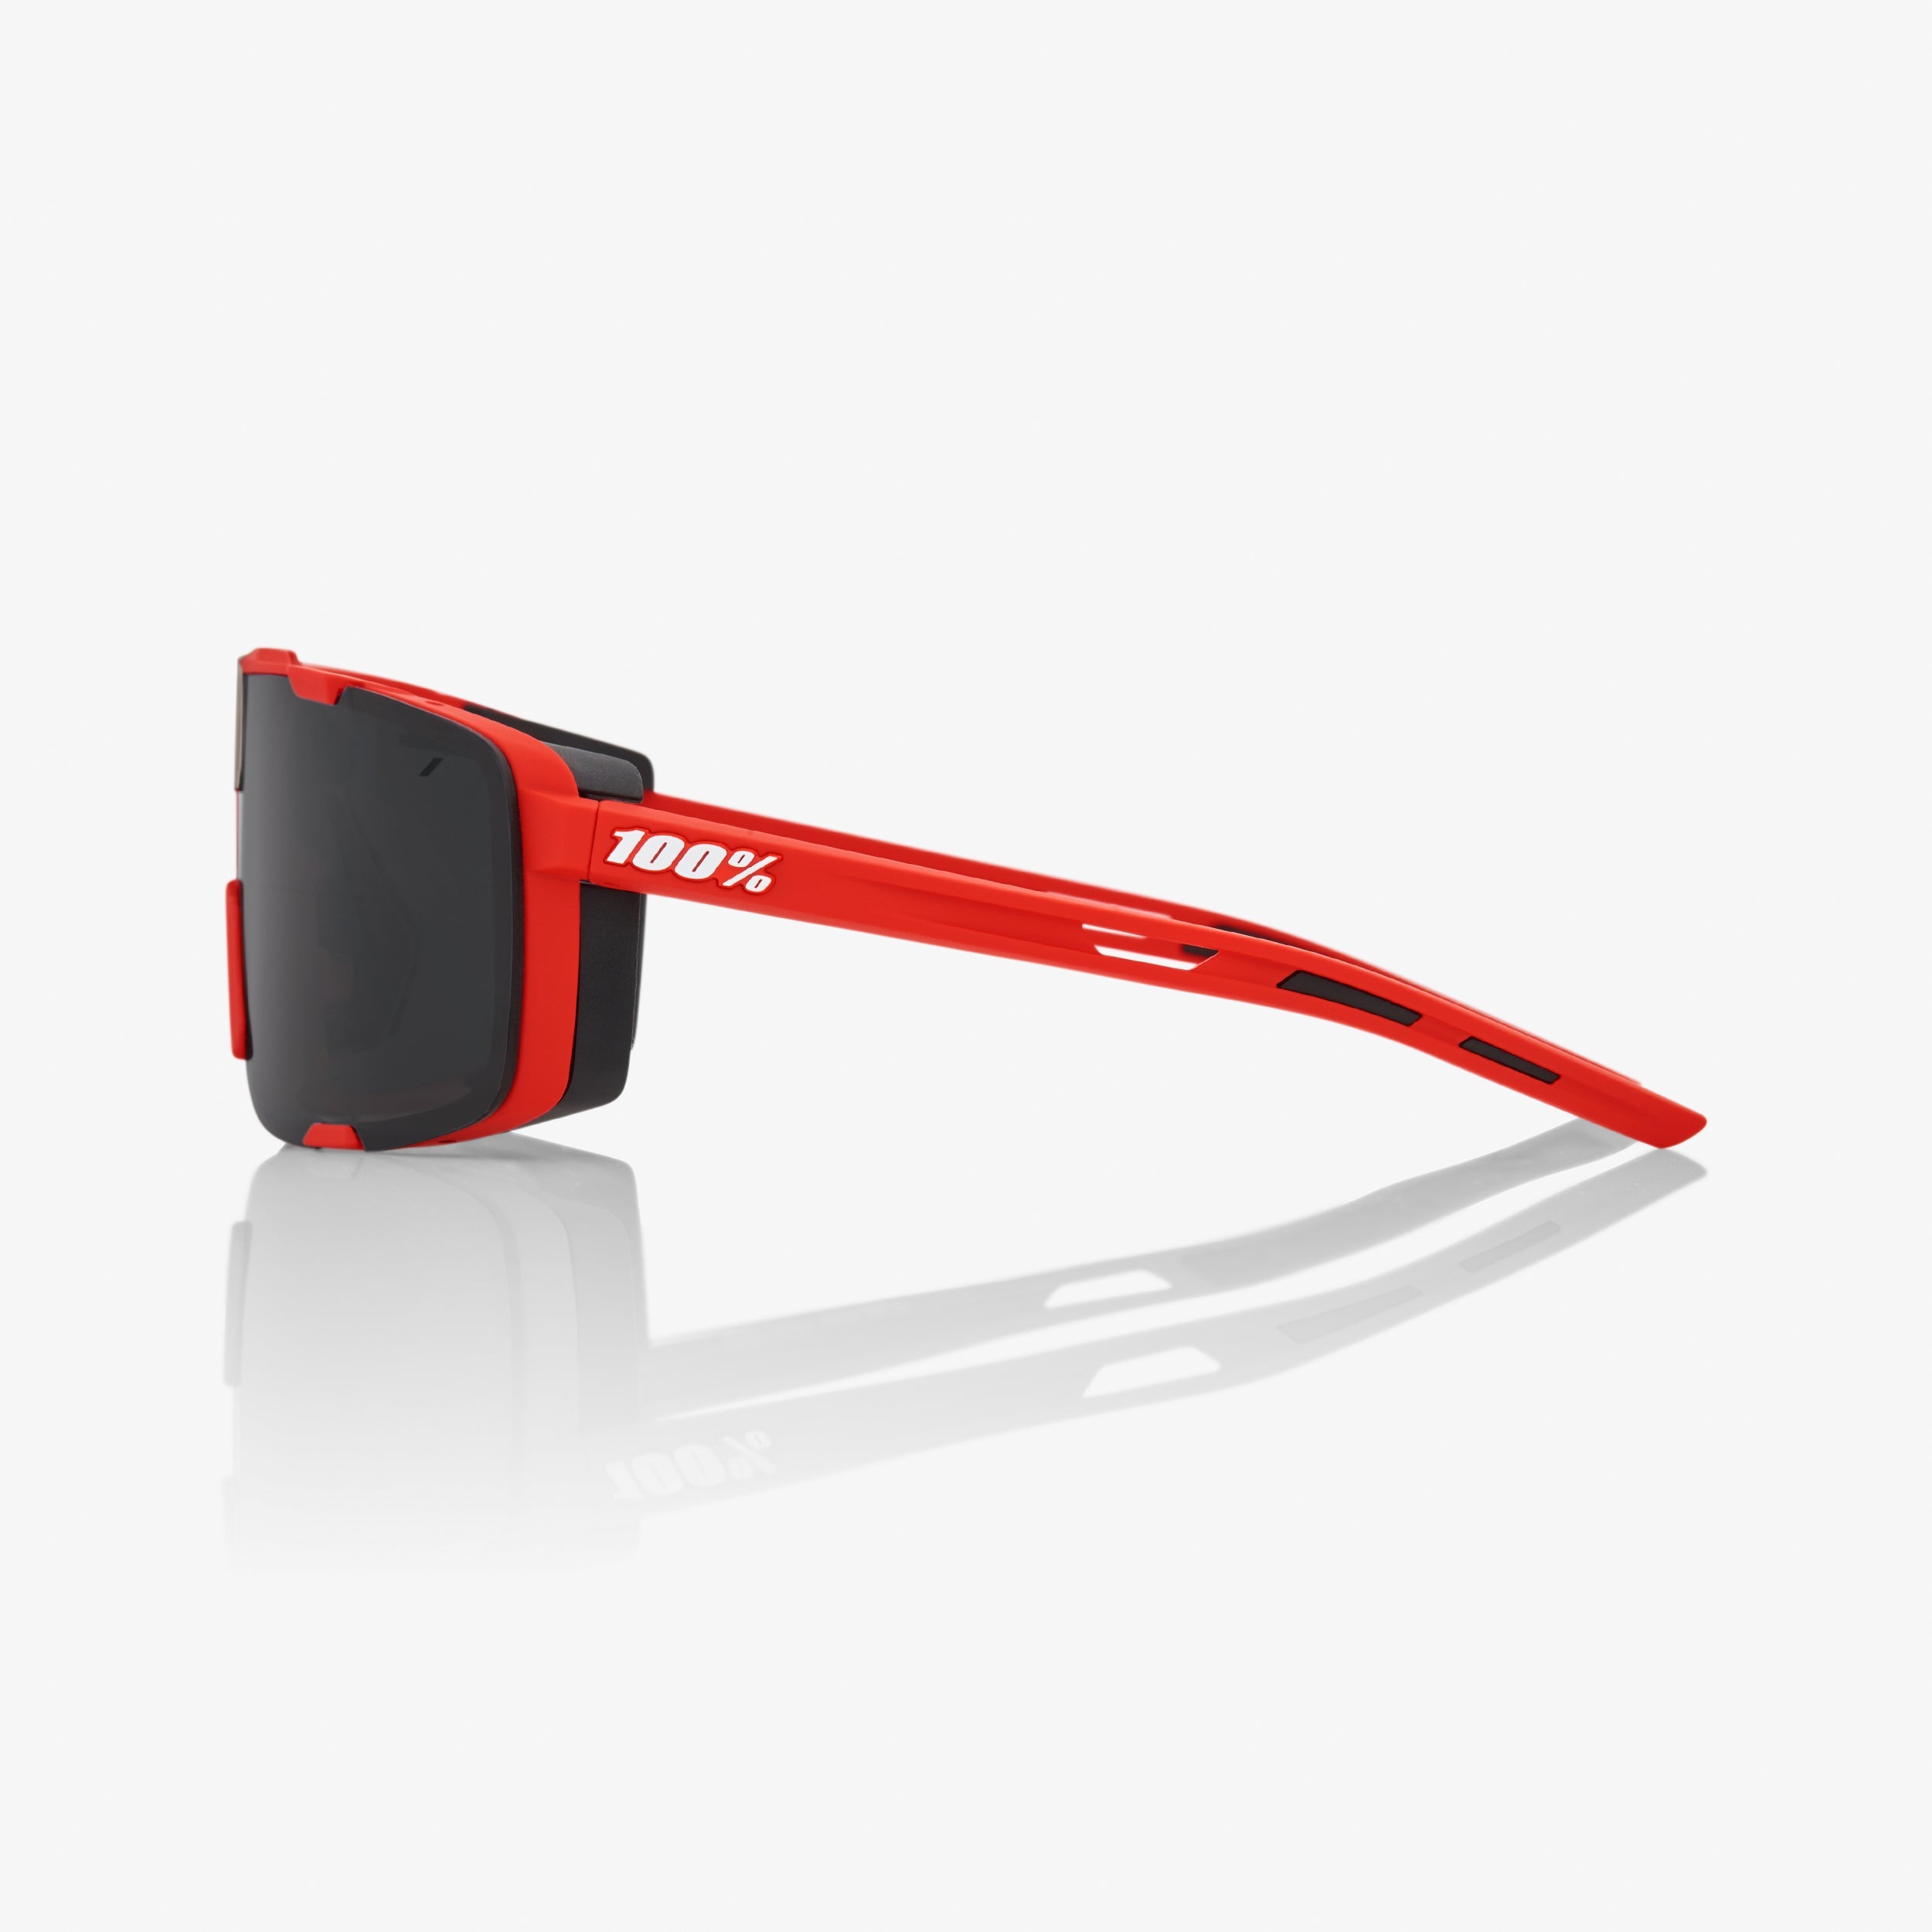 EASTCRAFT Soft Tact Red Black Mirror Lens